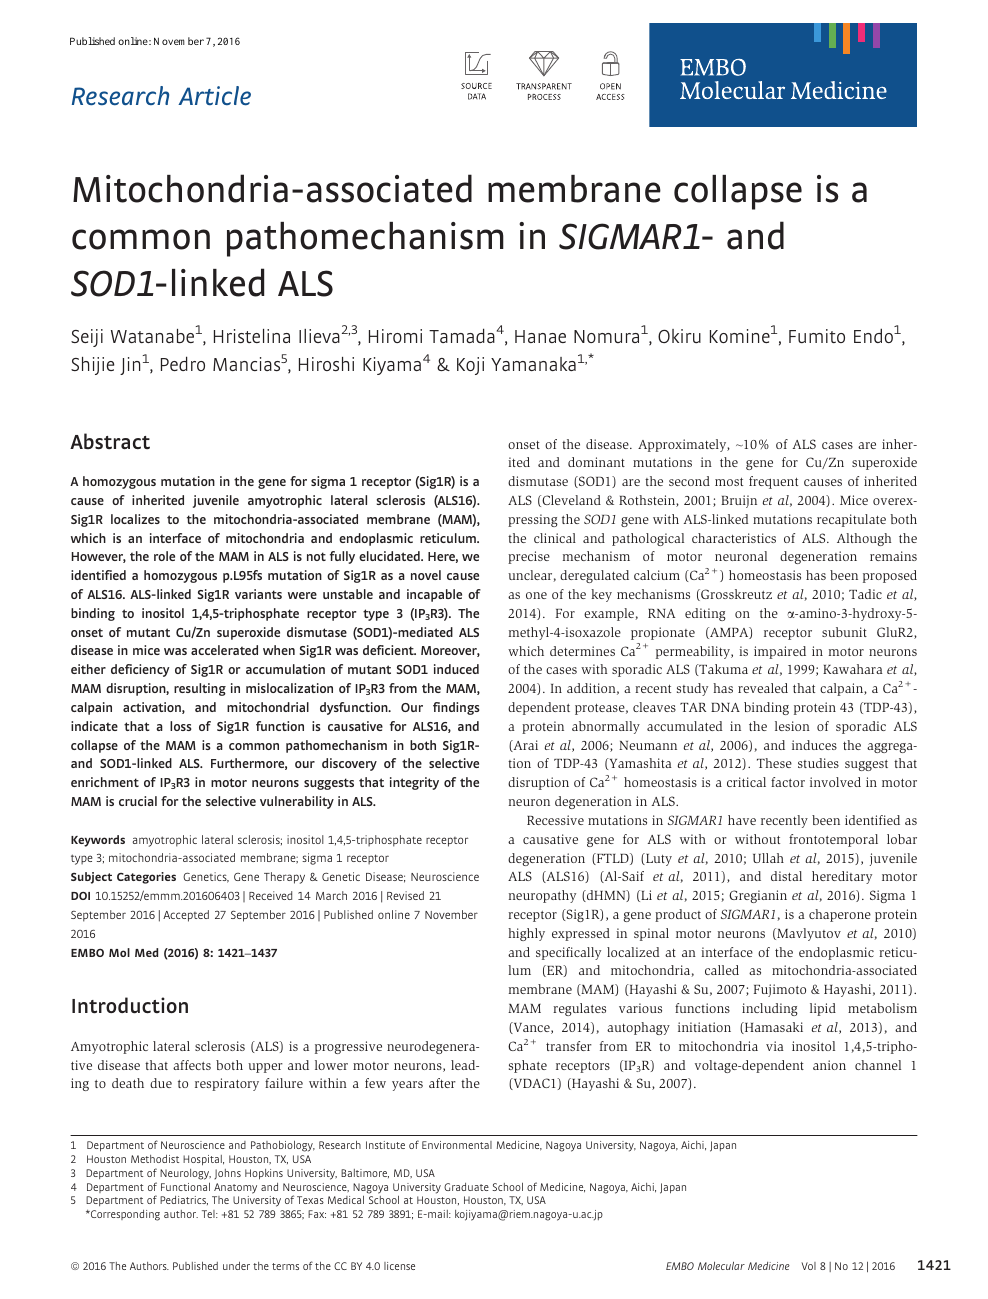 Mitochondria Associated Membrane Collapse Is A Common Pathomechanism In Sigmar1 And Sod1 Linked Als Topic Of Research Paper In Biological Sciences Download Scholarly Article Pdf And Read For Free On Cyberleninka